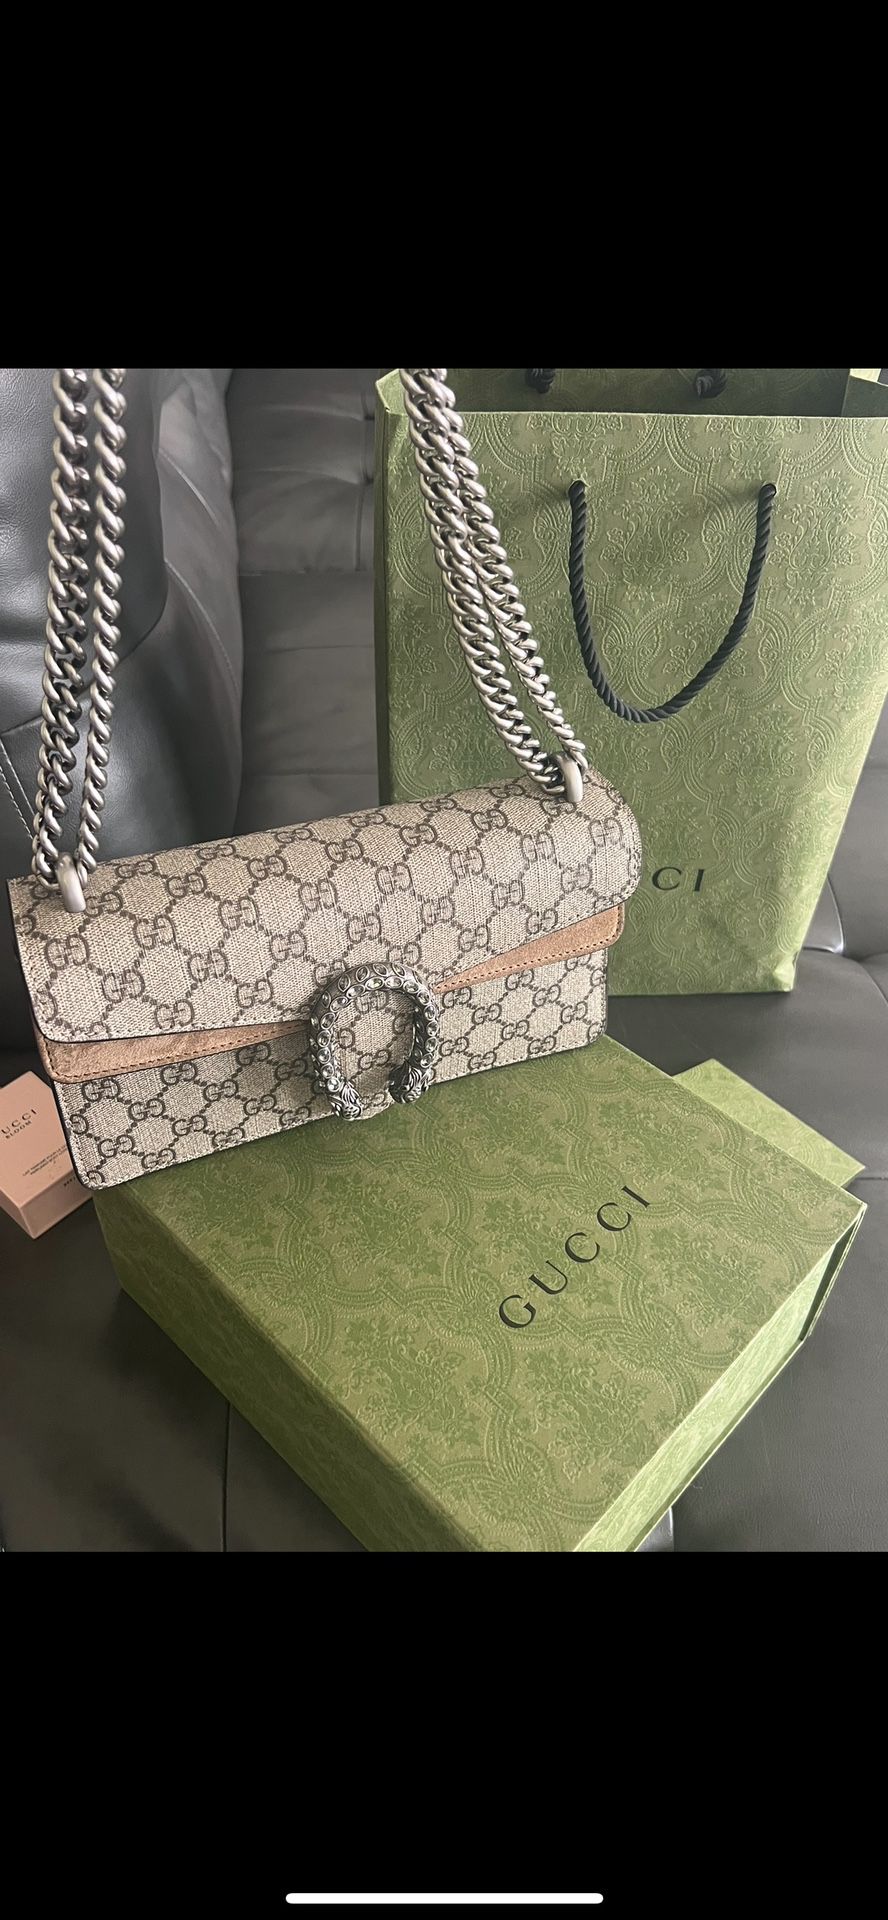 Authentic Gucci Bag(Firm Price) $2800